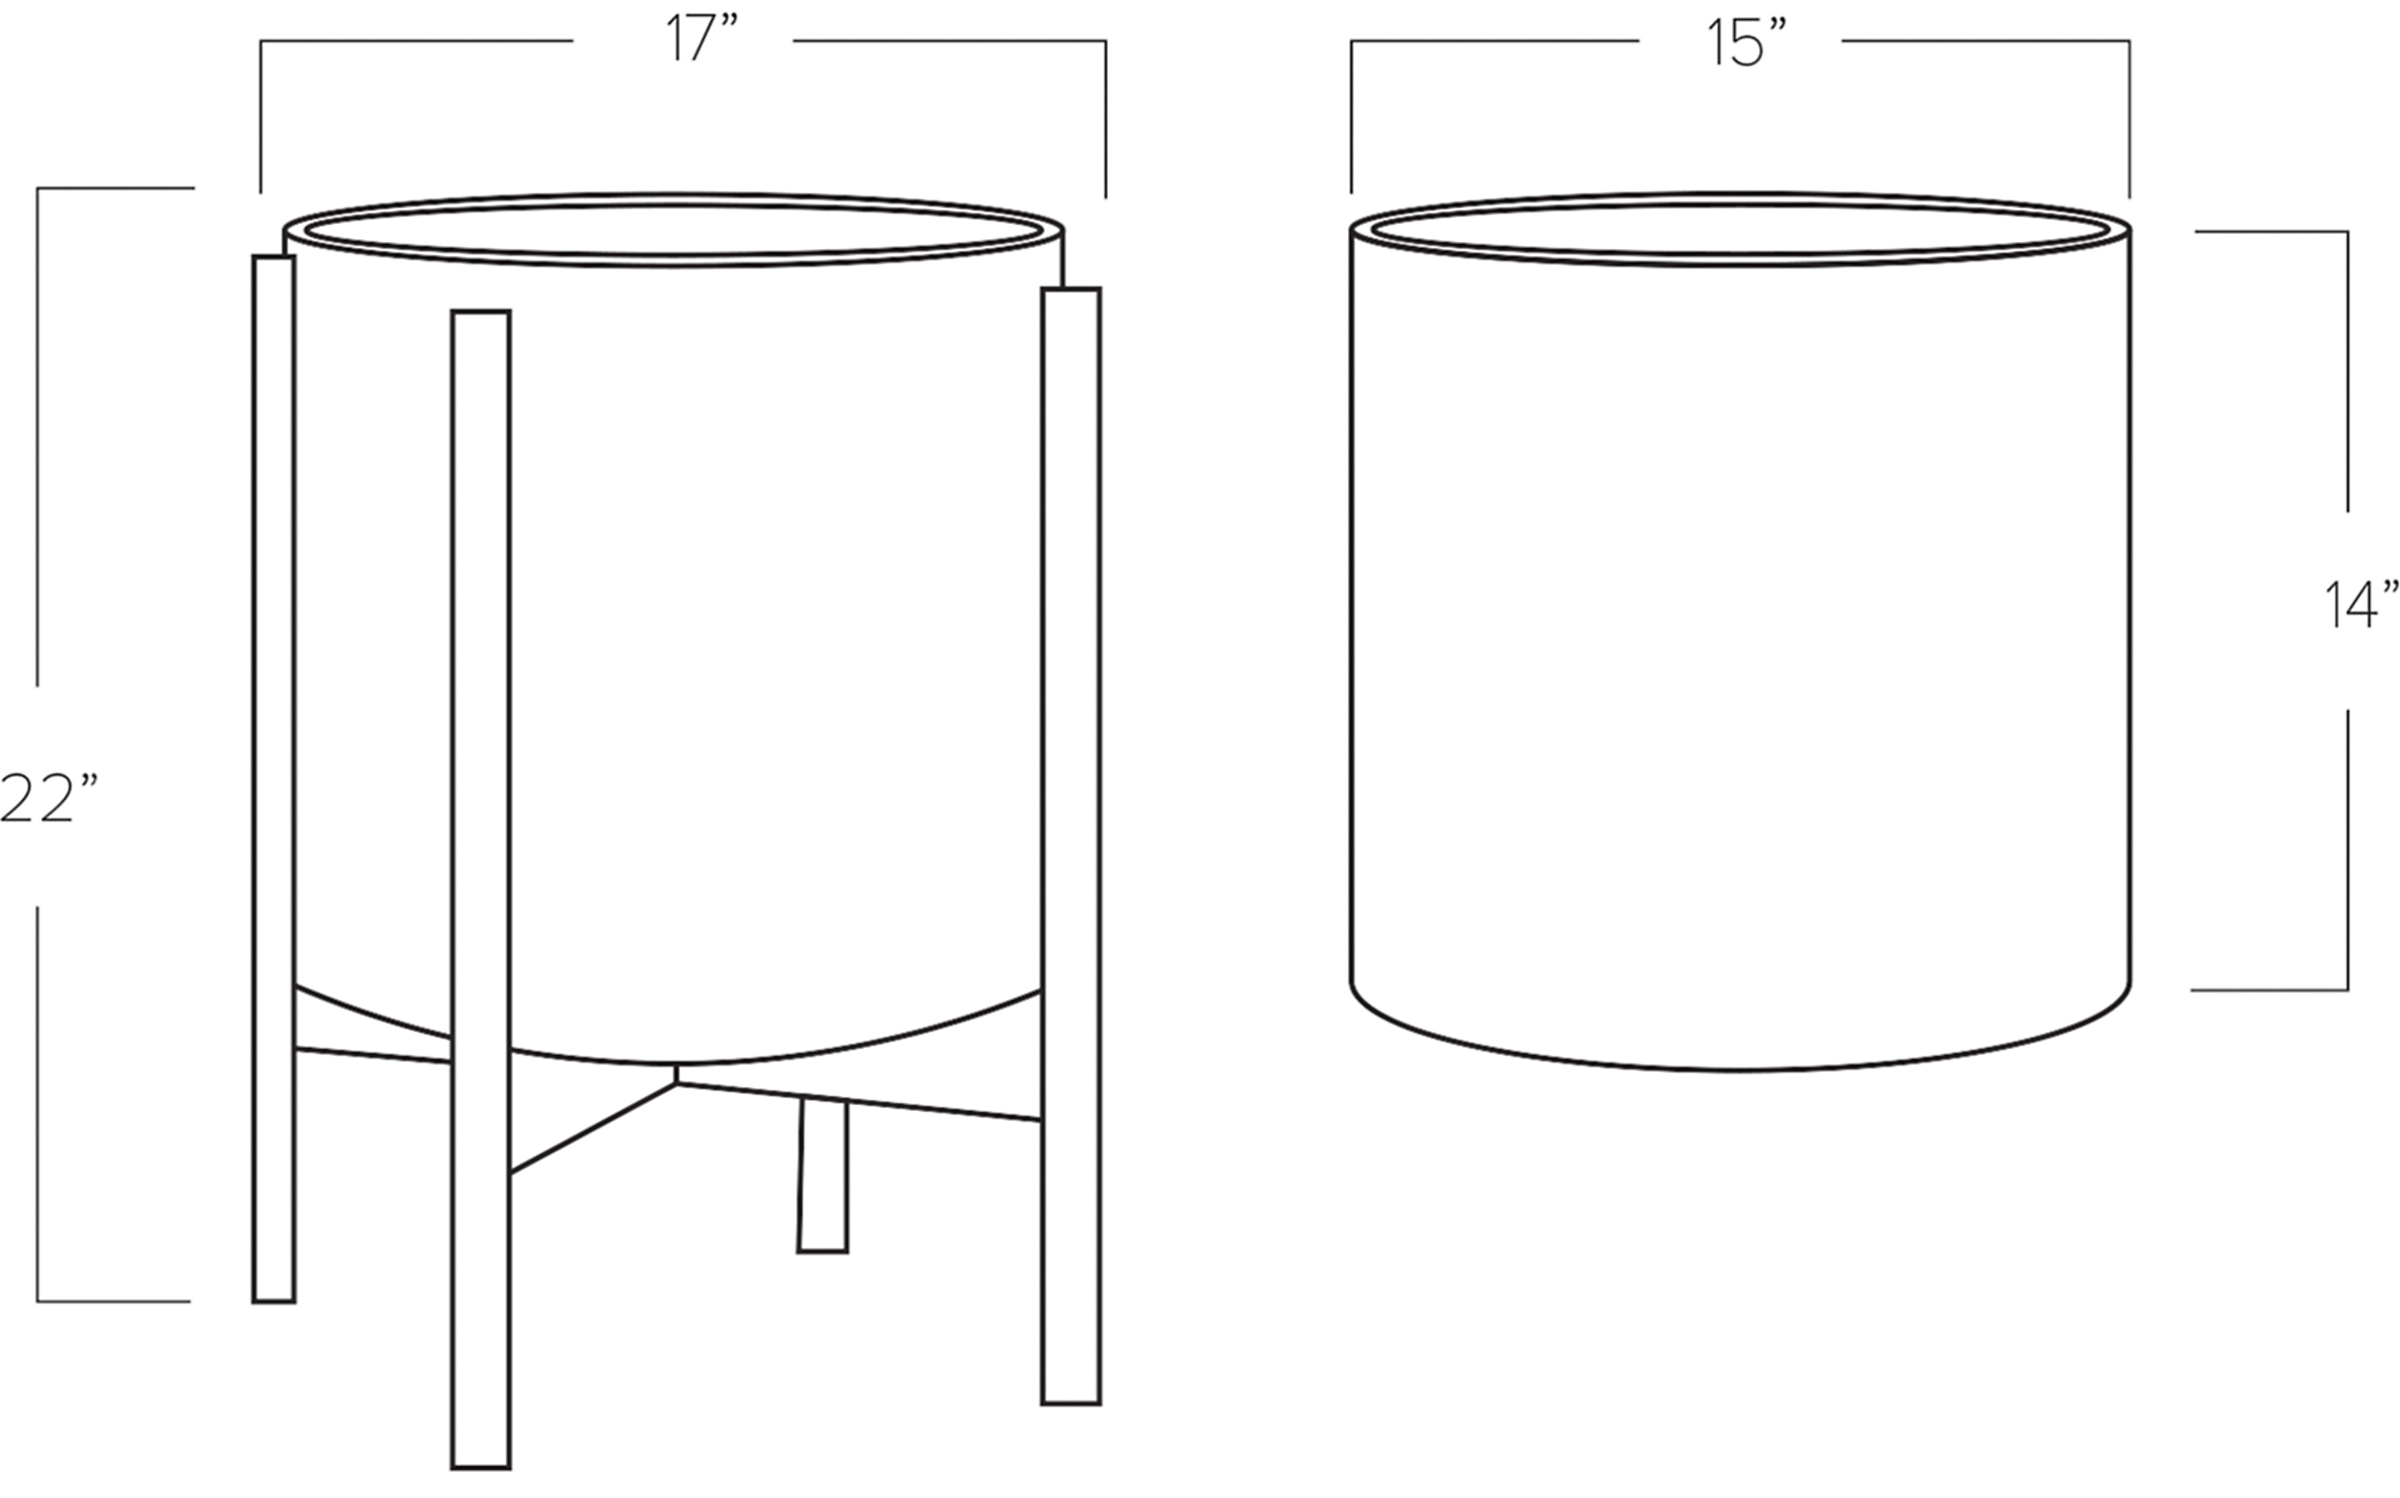 Dimension Drawing of Case Study 17w 22h 15 round Planter with Wood Stand.